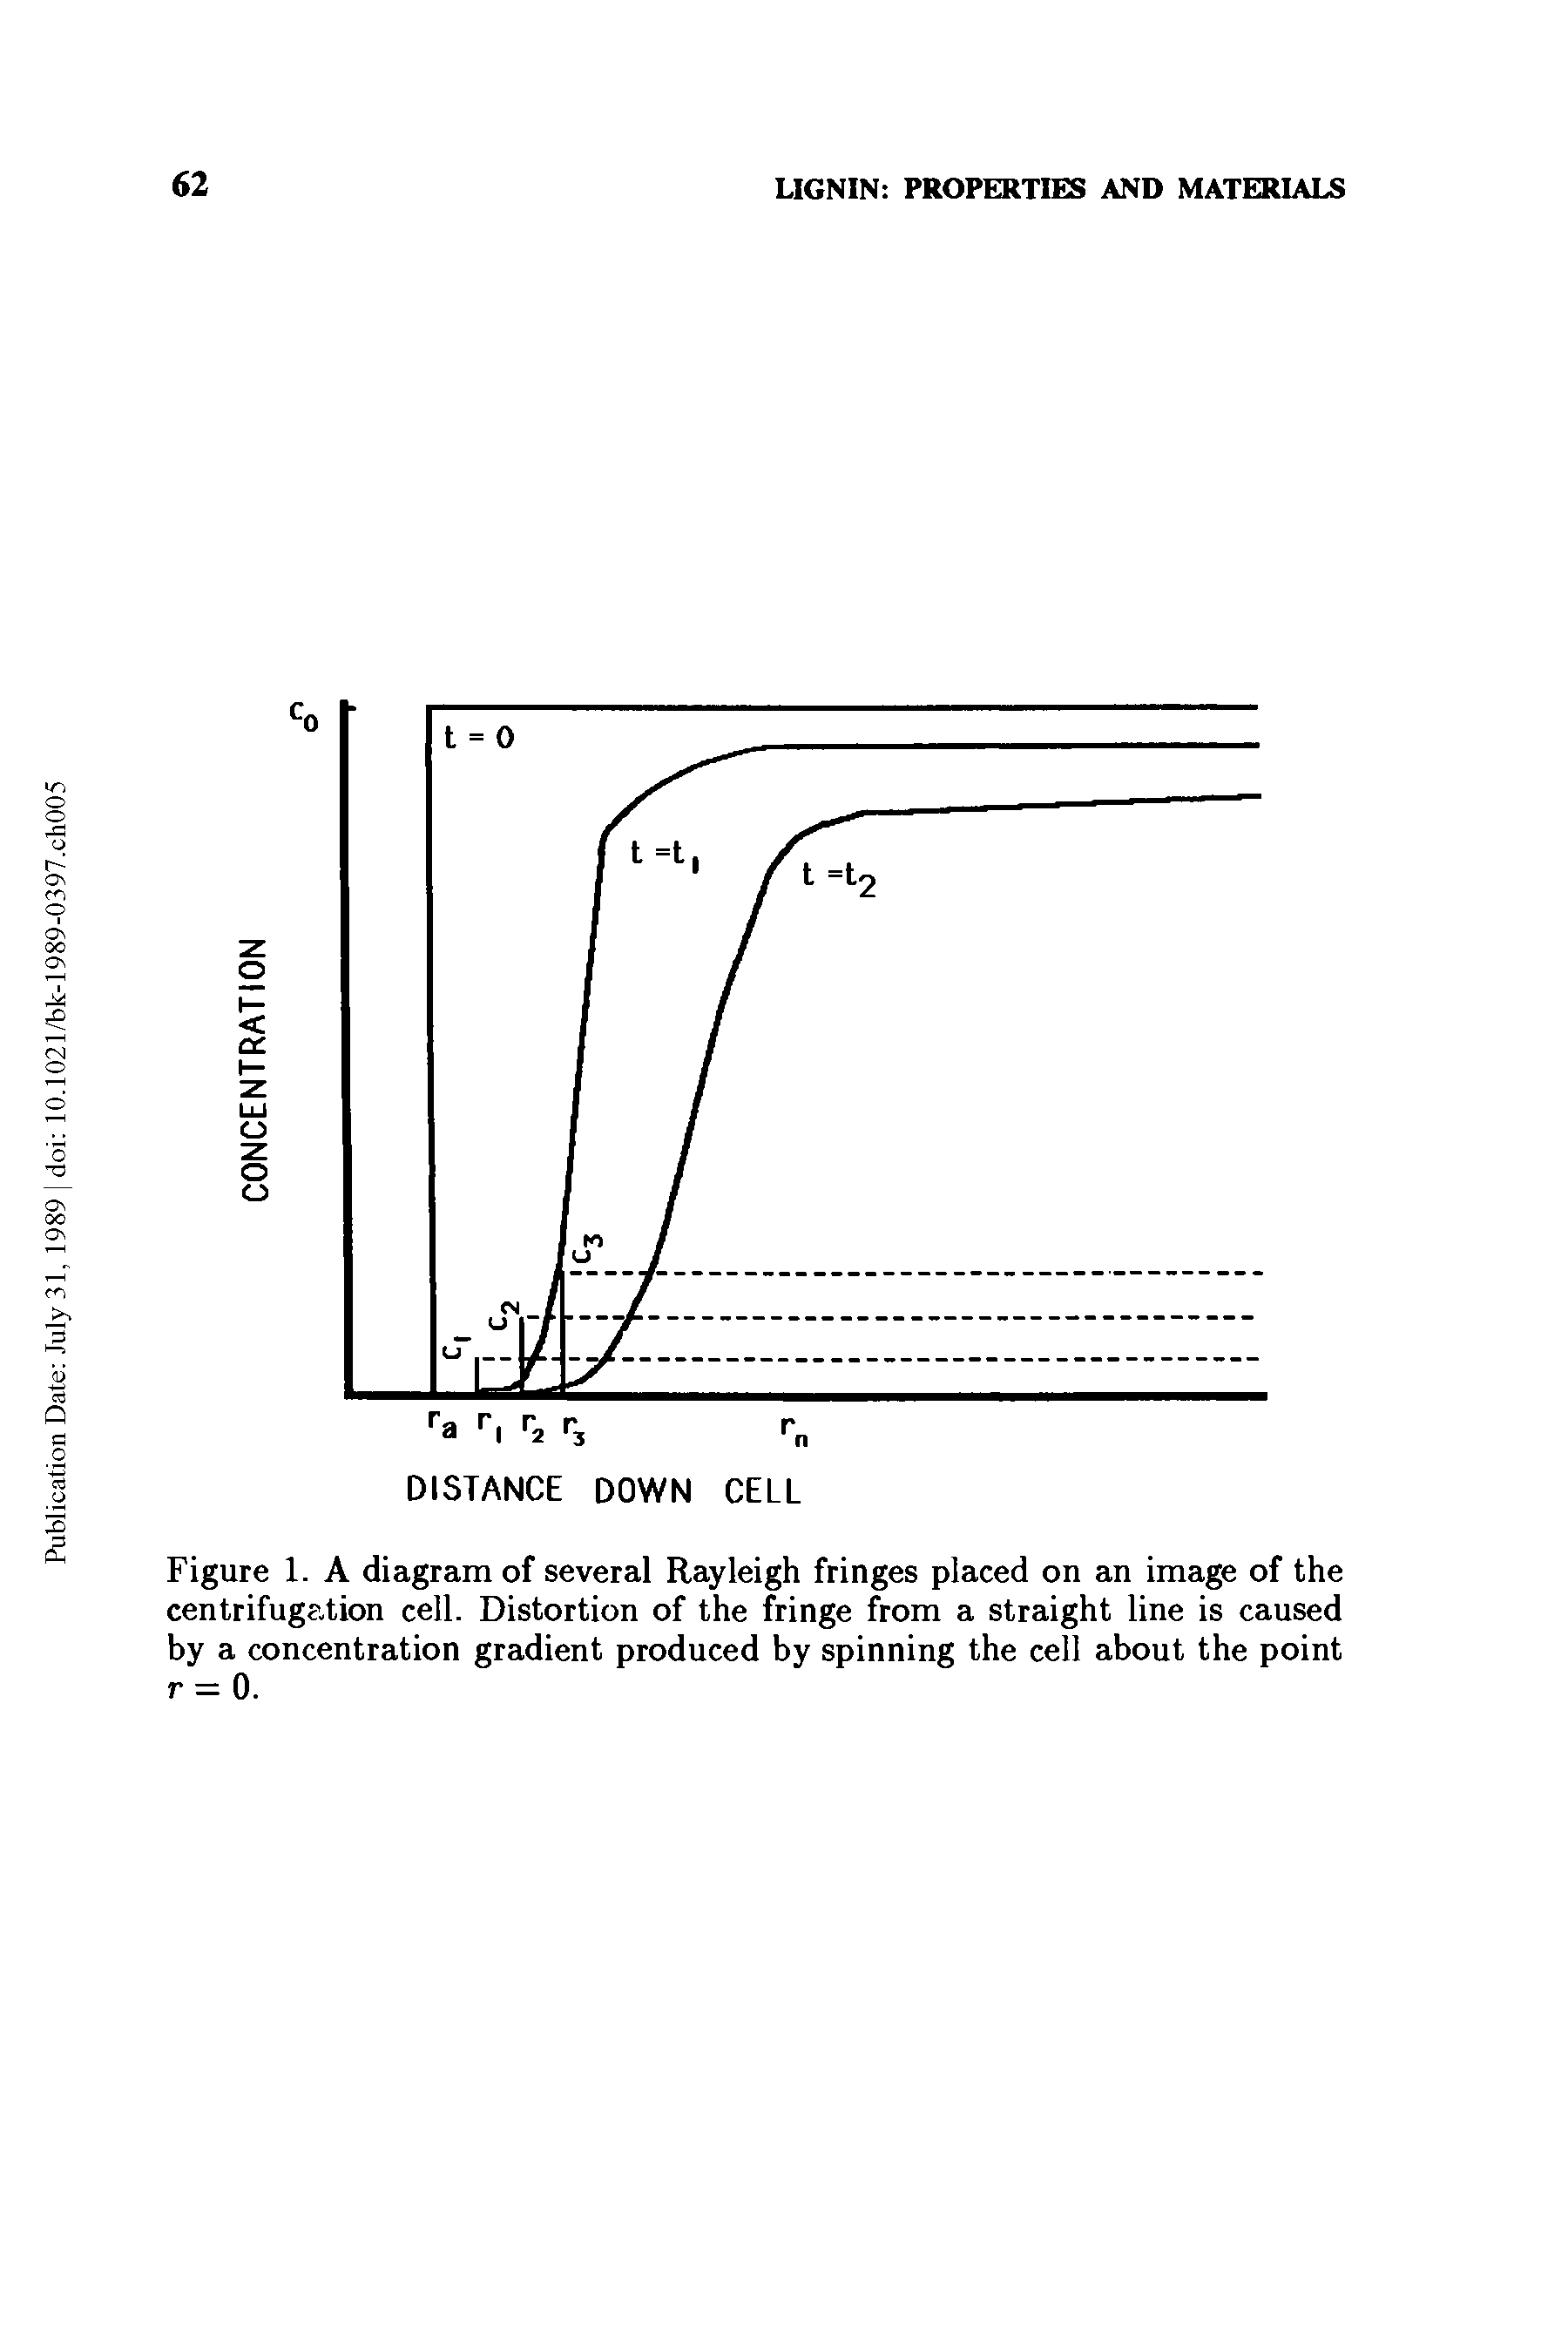 Figure 1. A diagram of several Rayleigh fringes placed on an image of the centrifugation cell. Distortion of the fringe from a straight line is caused by a concentration gradient produced by spinning the cell about the point r = 0.